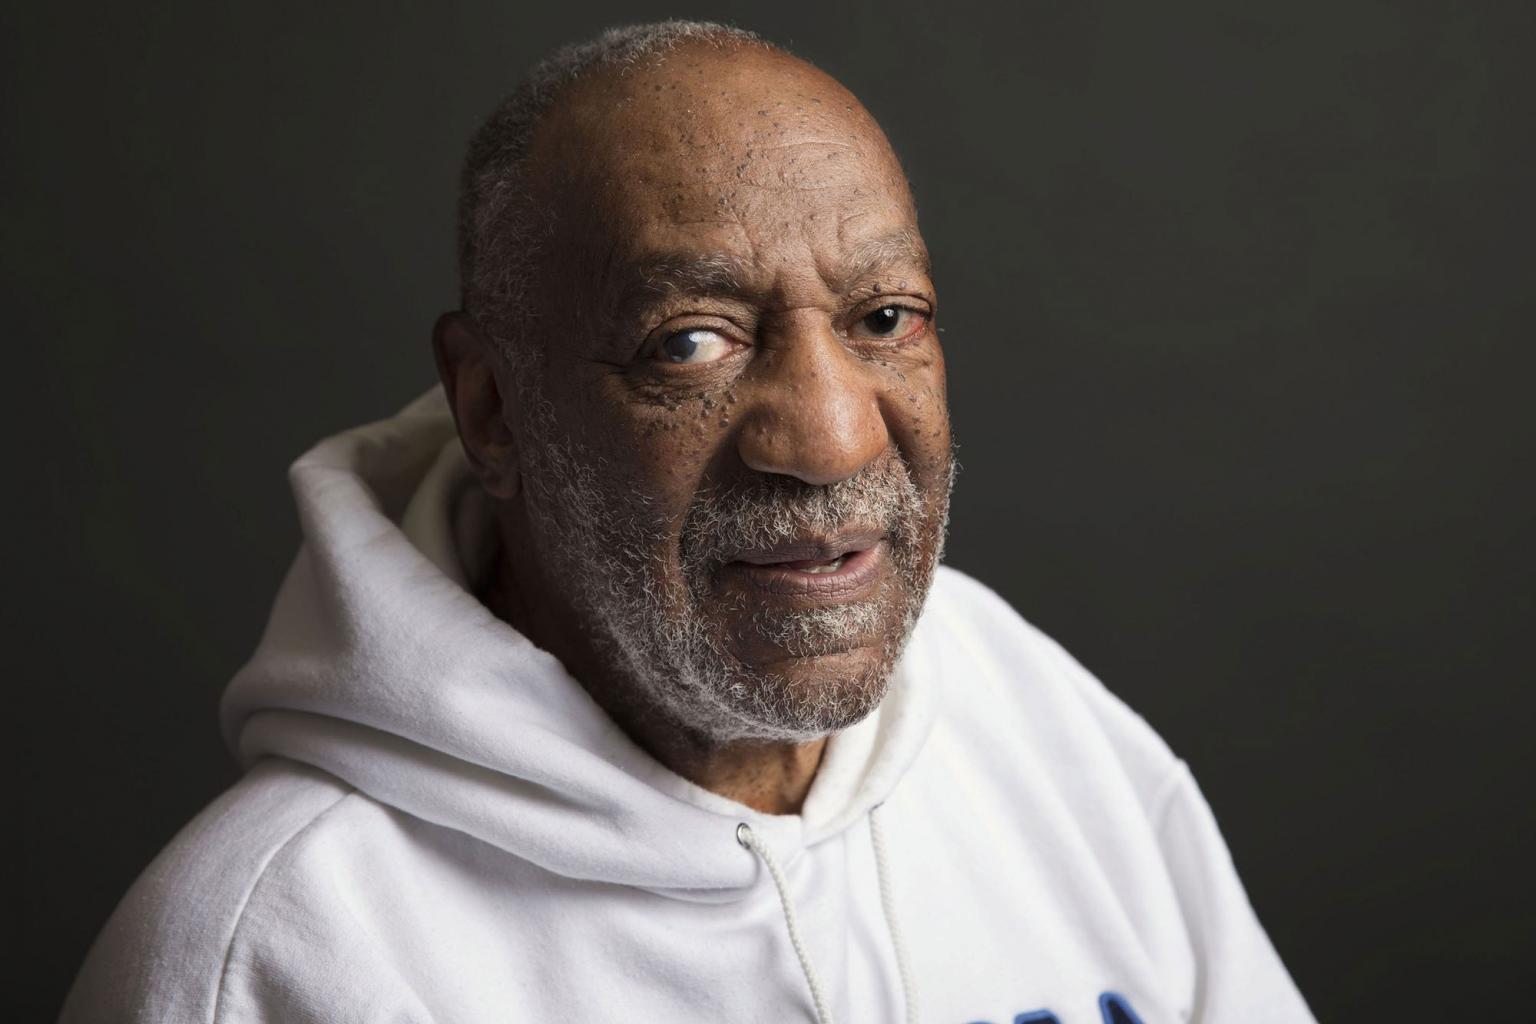 Two Jurors Prevented a Guilty Verdict in Bill Cosbyâ€™sÂ Trial